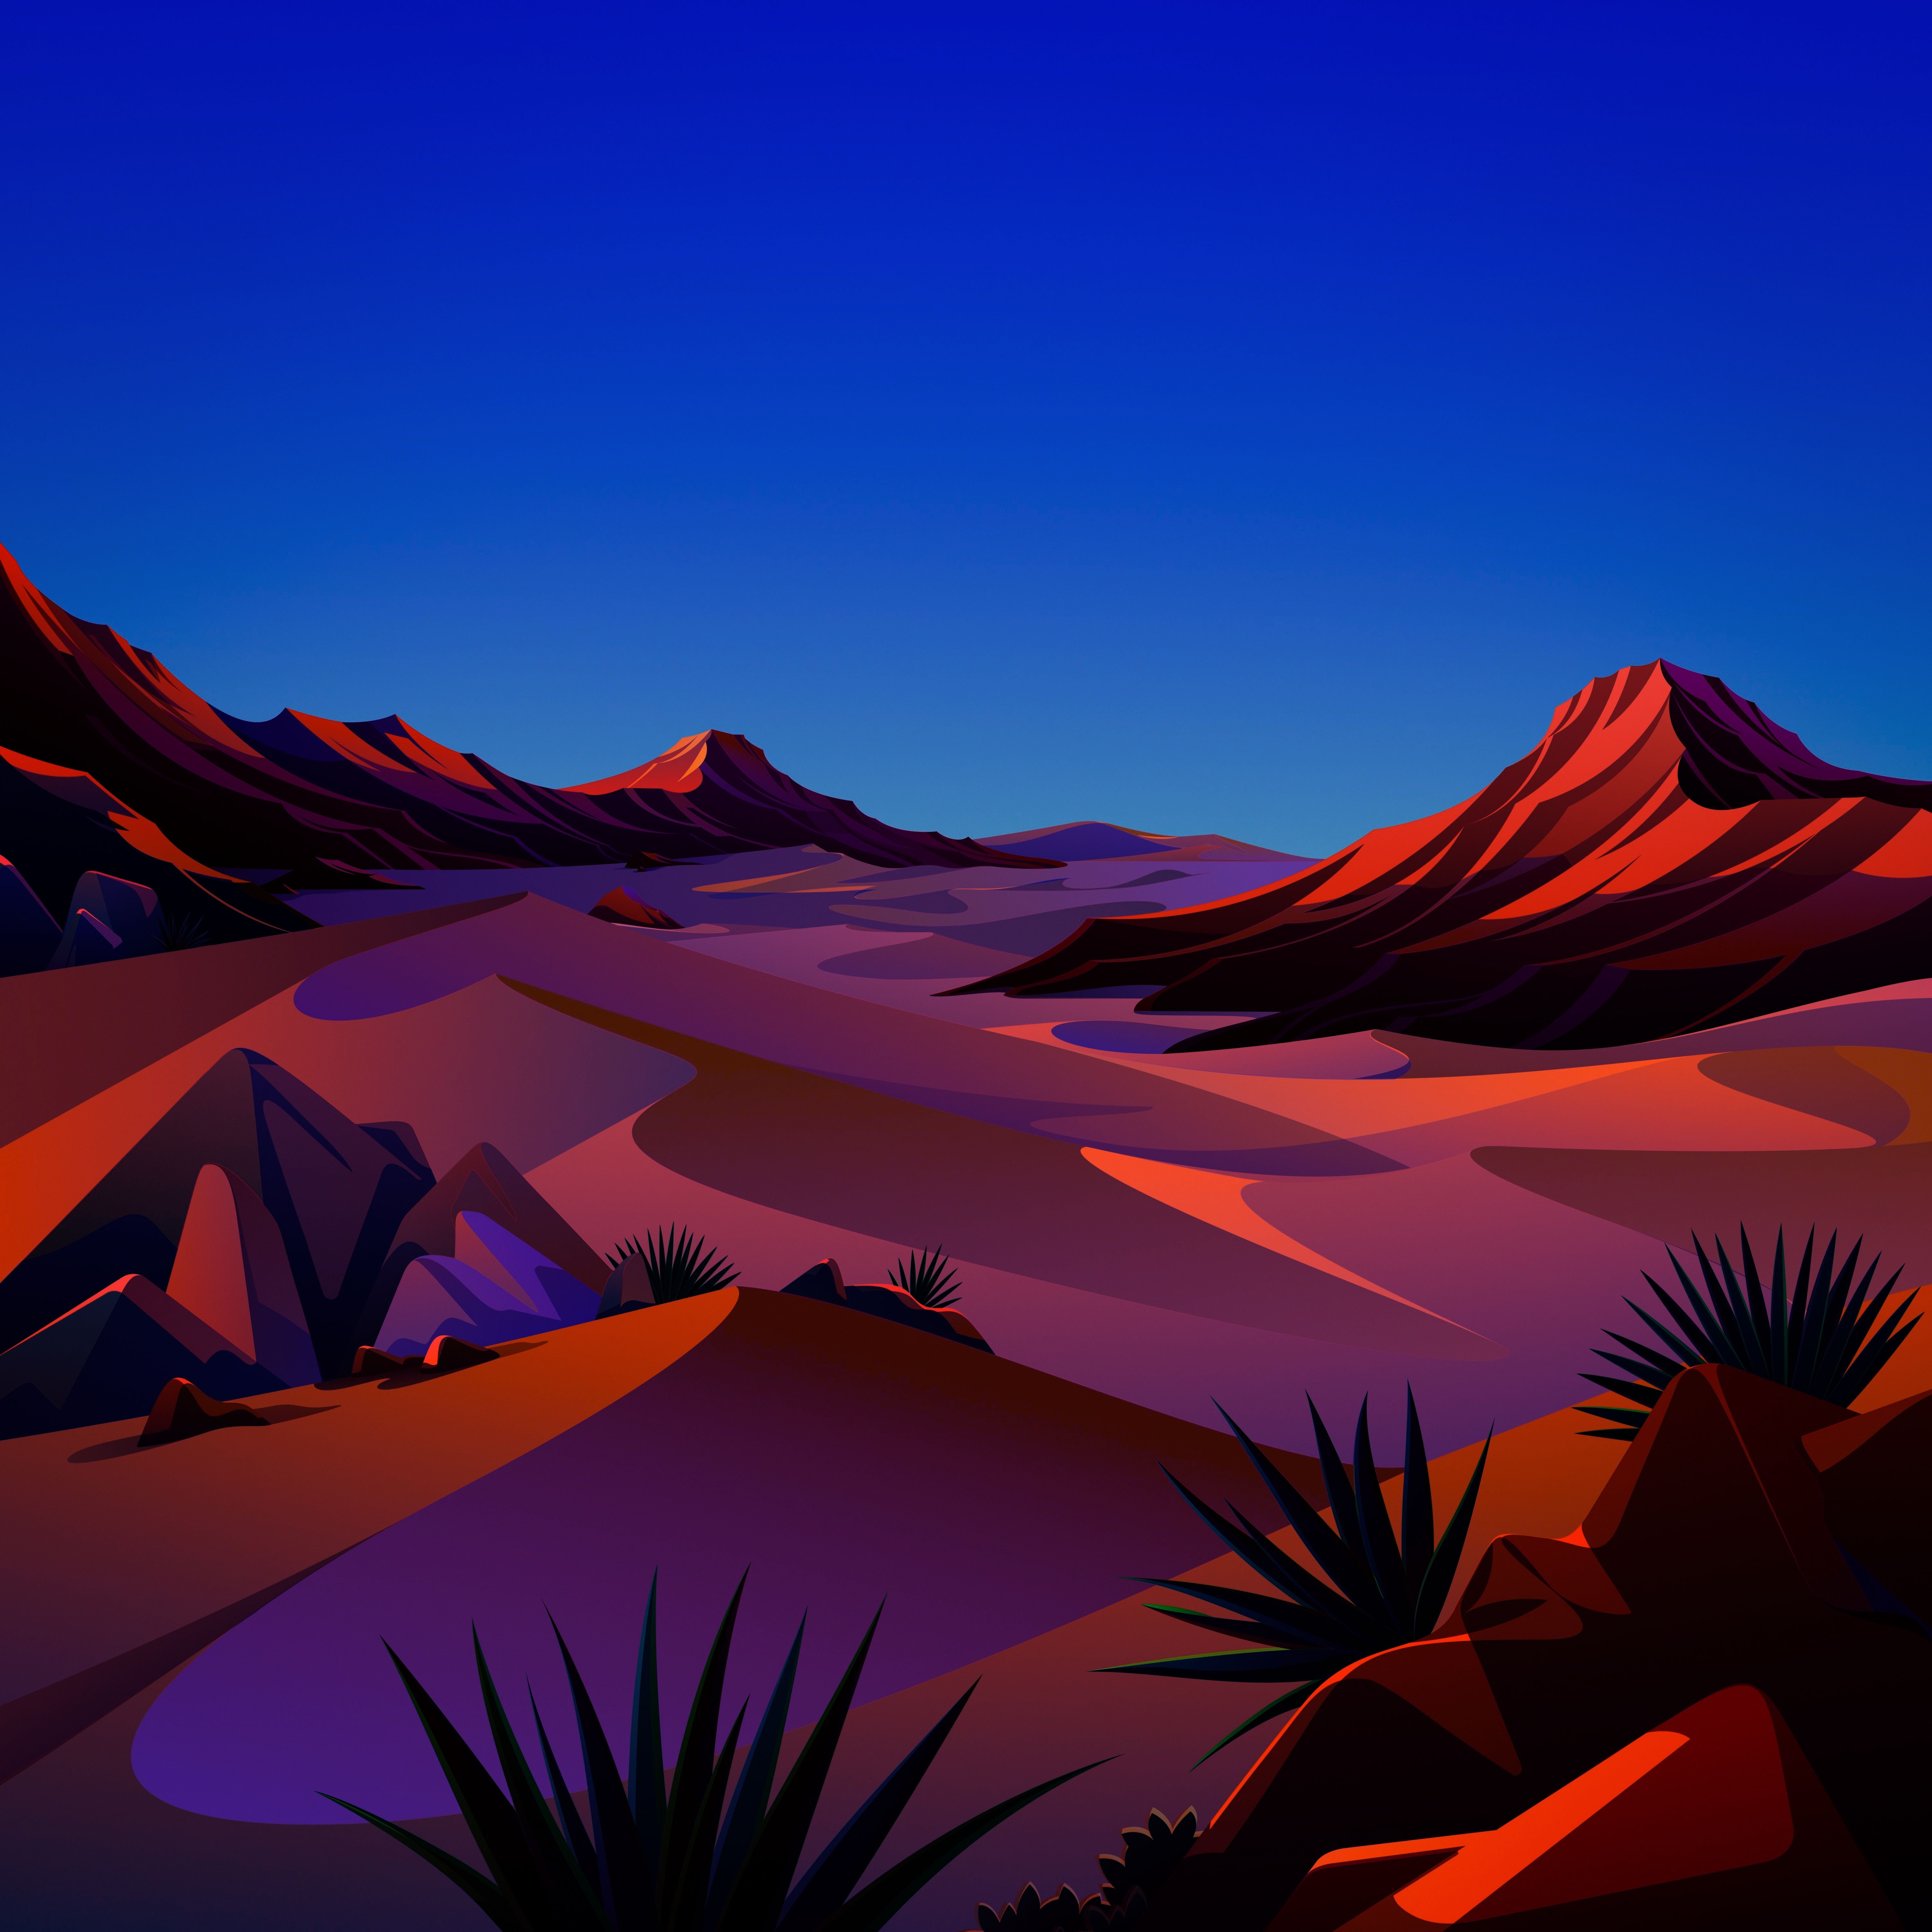 A desert landscape with sand dunes and mountains in the background - Vector